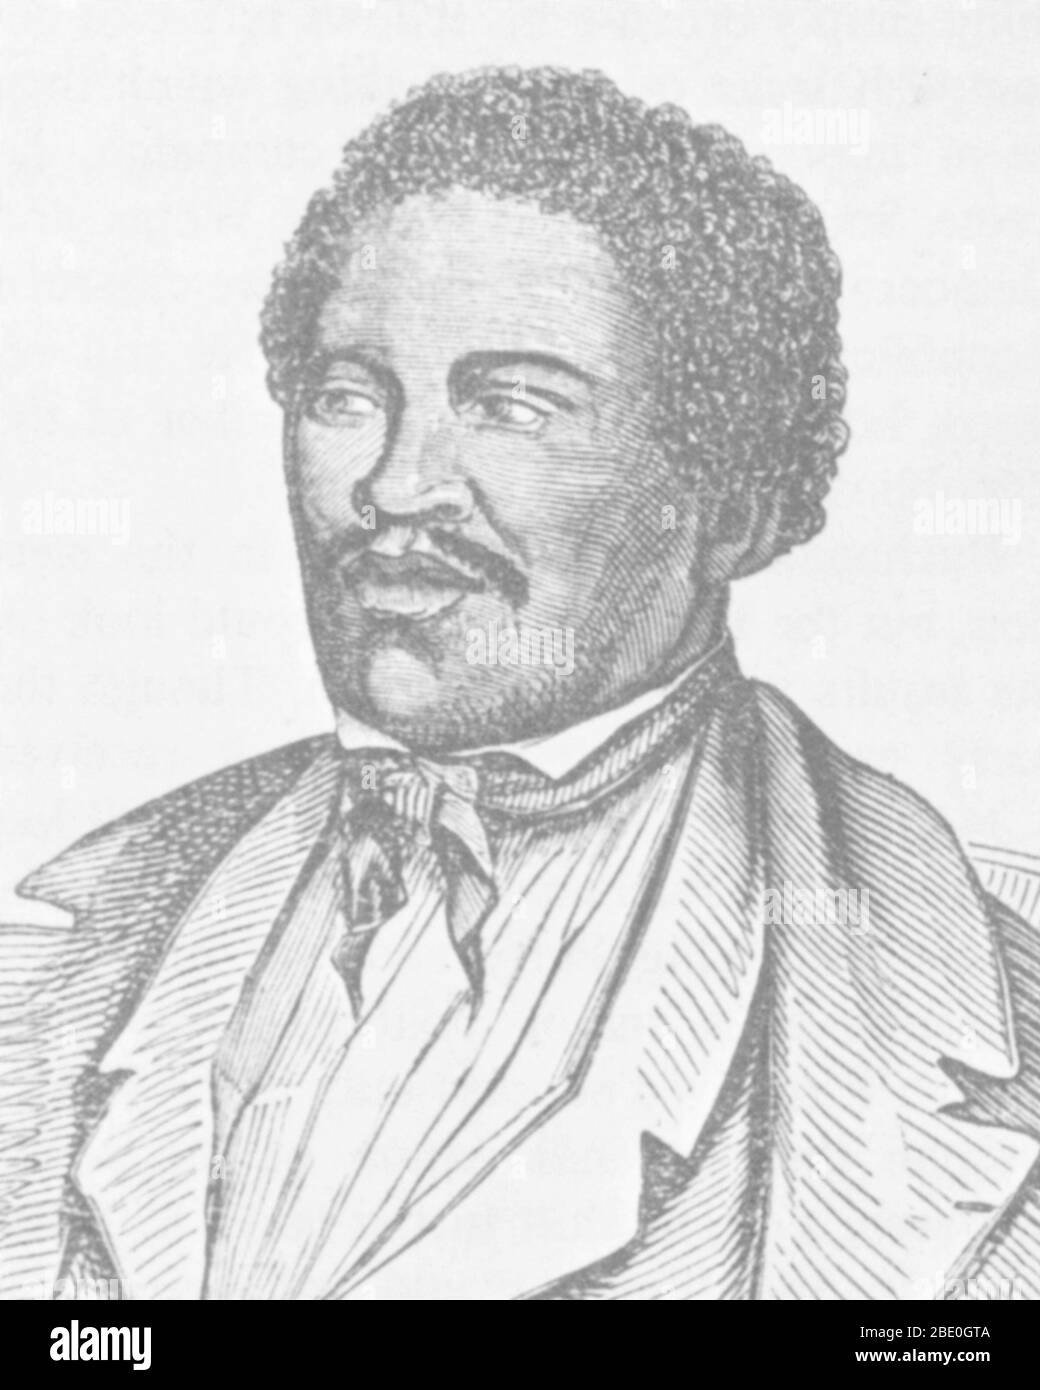 Henry 'Box' Brown was a 19th century Virginia slave who escaped to freedom by arranging to have himself mailed to Philadelphia abolitionists in a wooden crate. Stock Photo